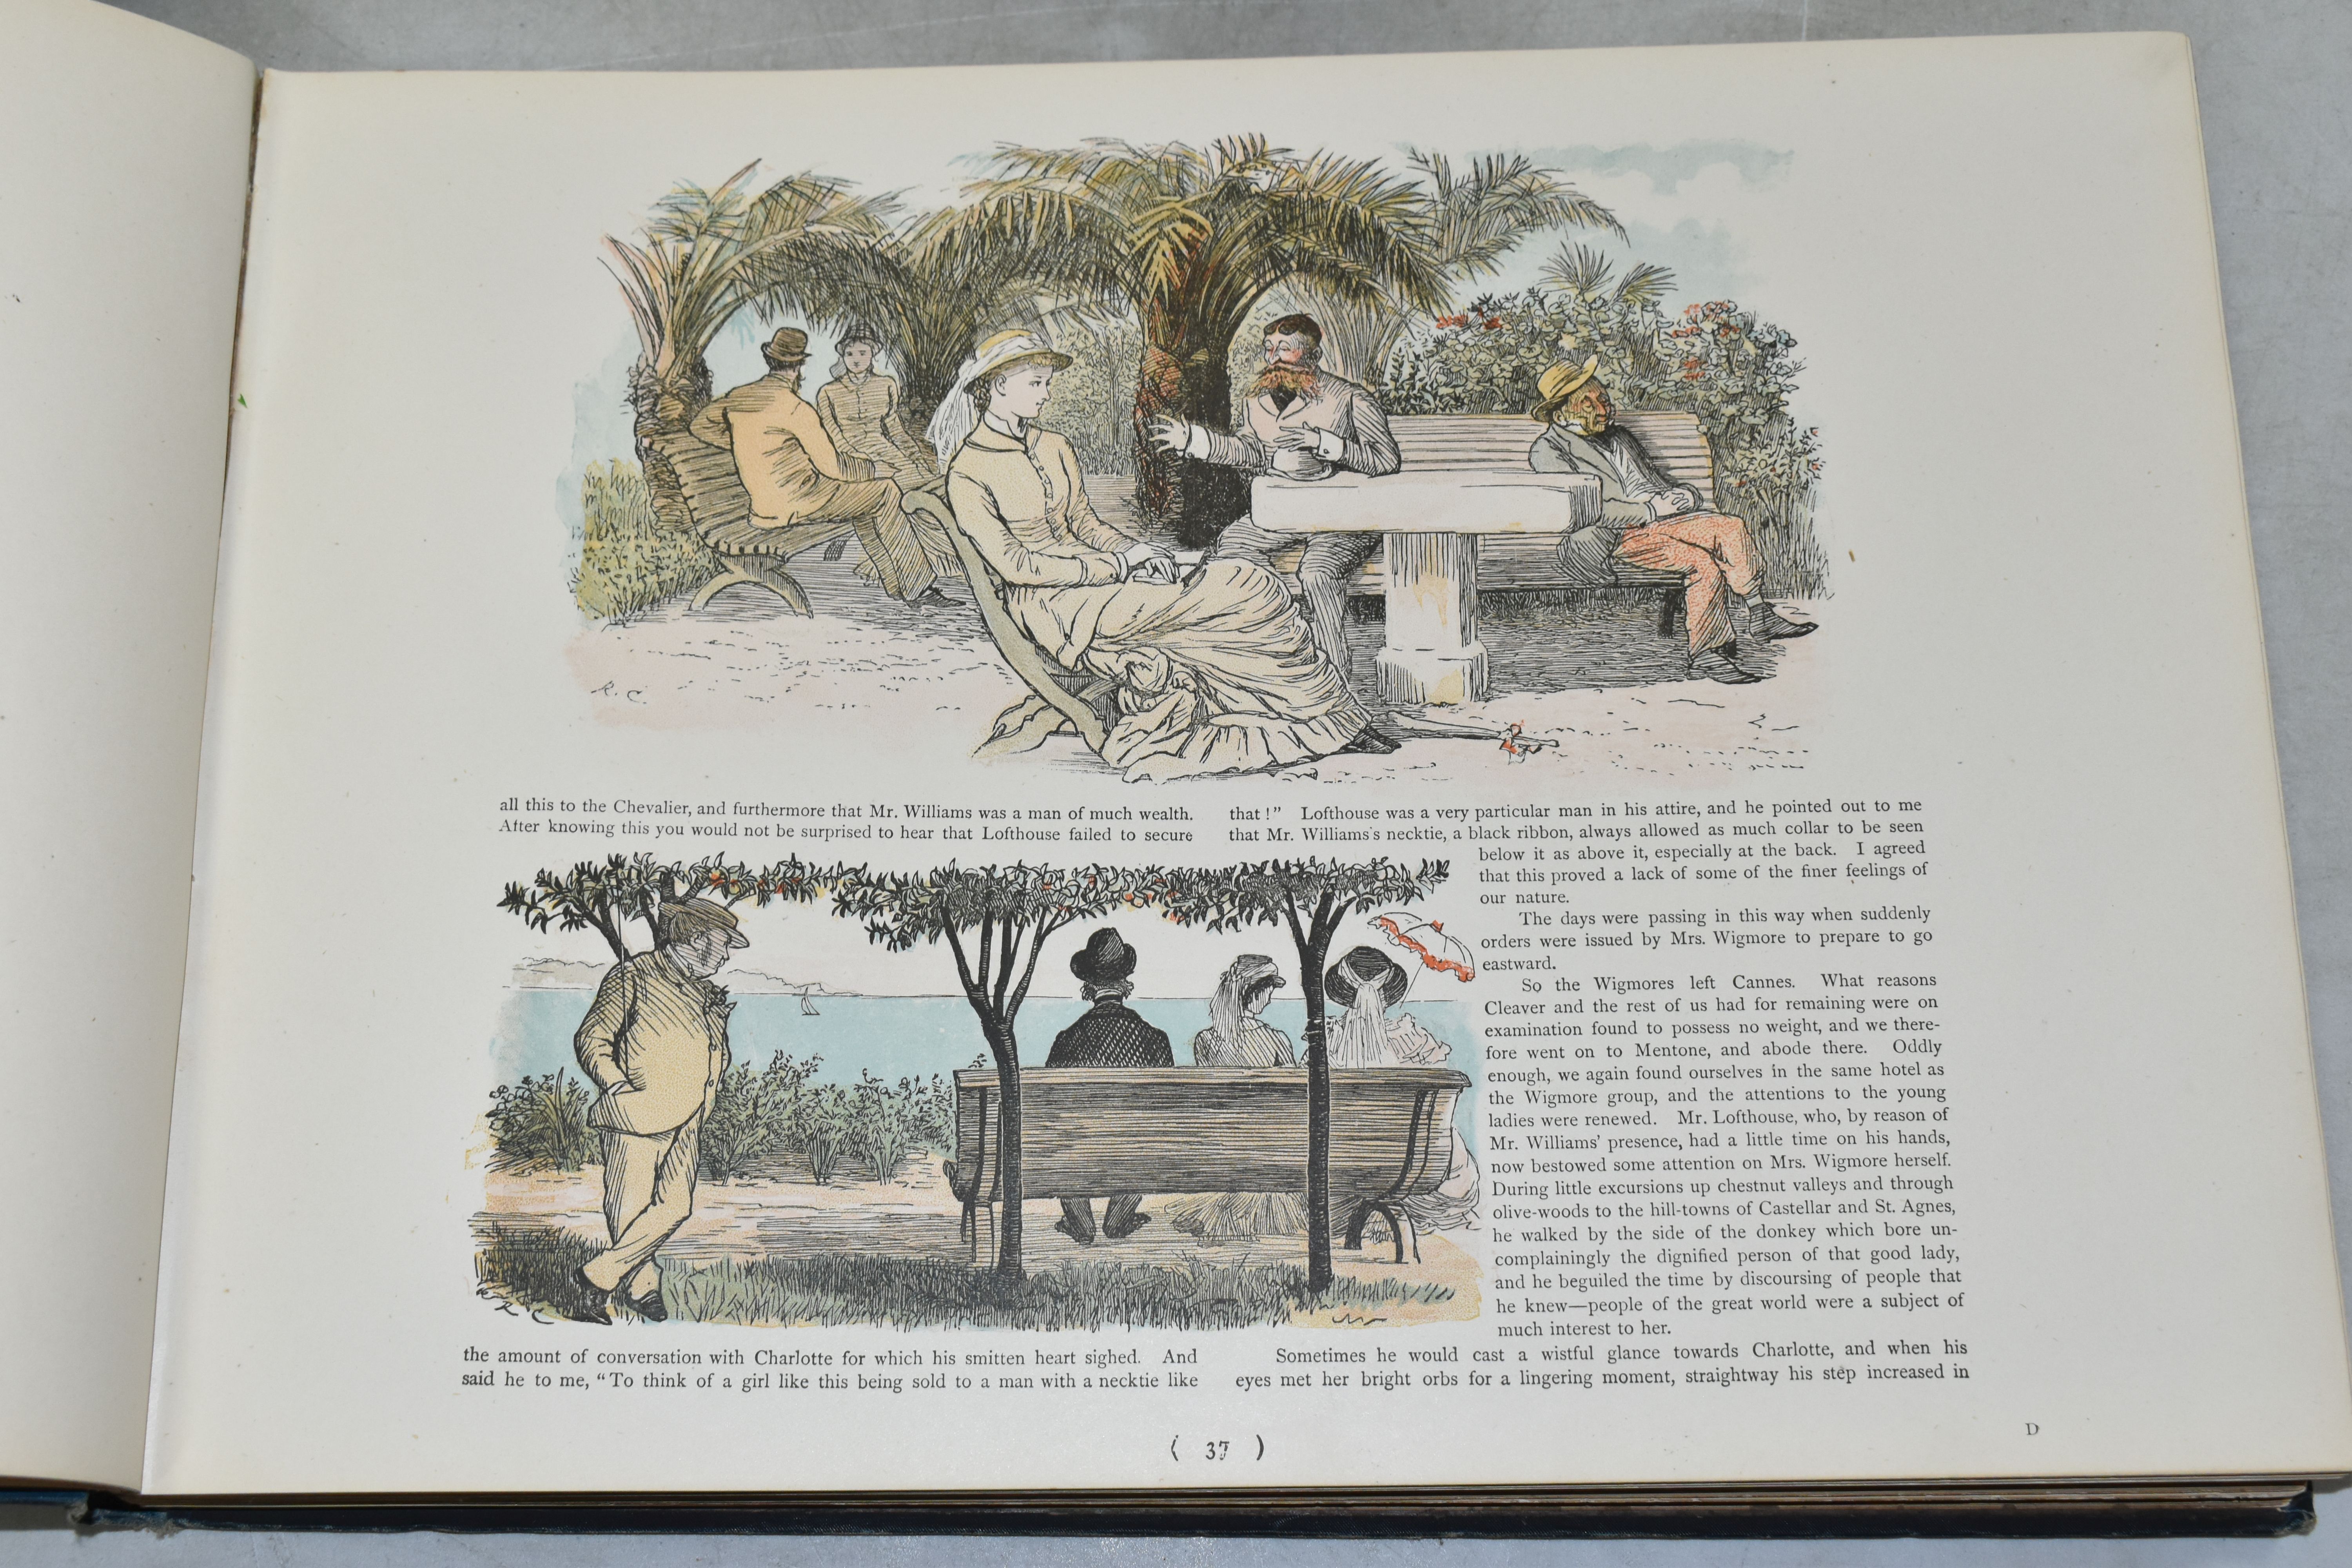 RANDOLPH CALDECOTT'S 'GRAPHIC' PICTURES, Complete Edition, published by George Routledge & Sons (1) - Image 10 of 16